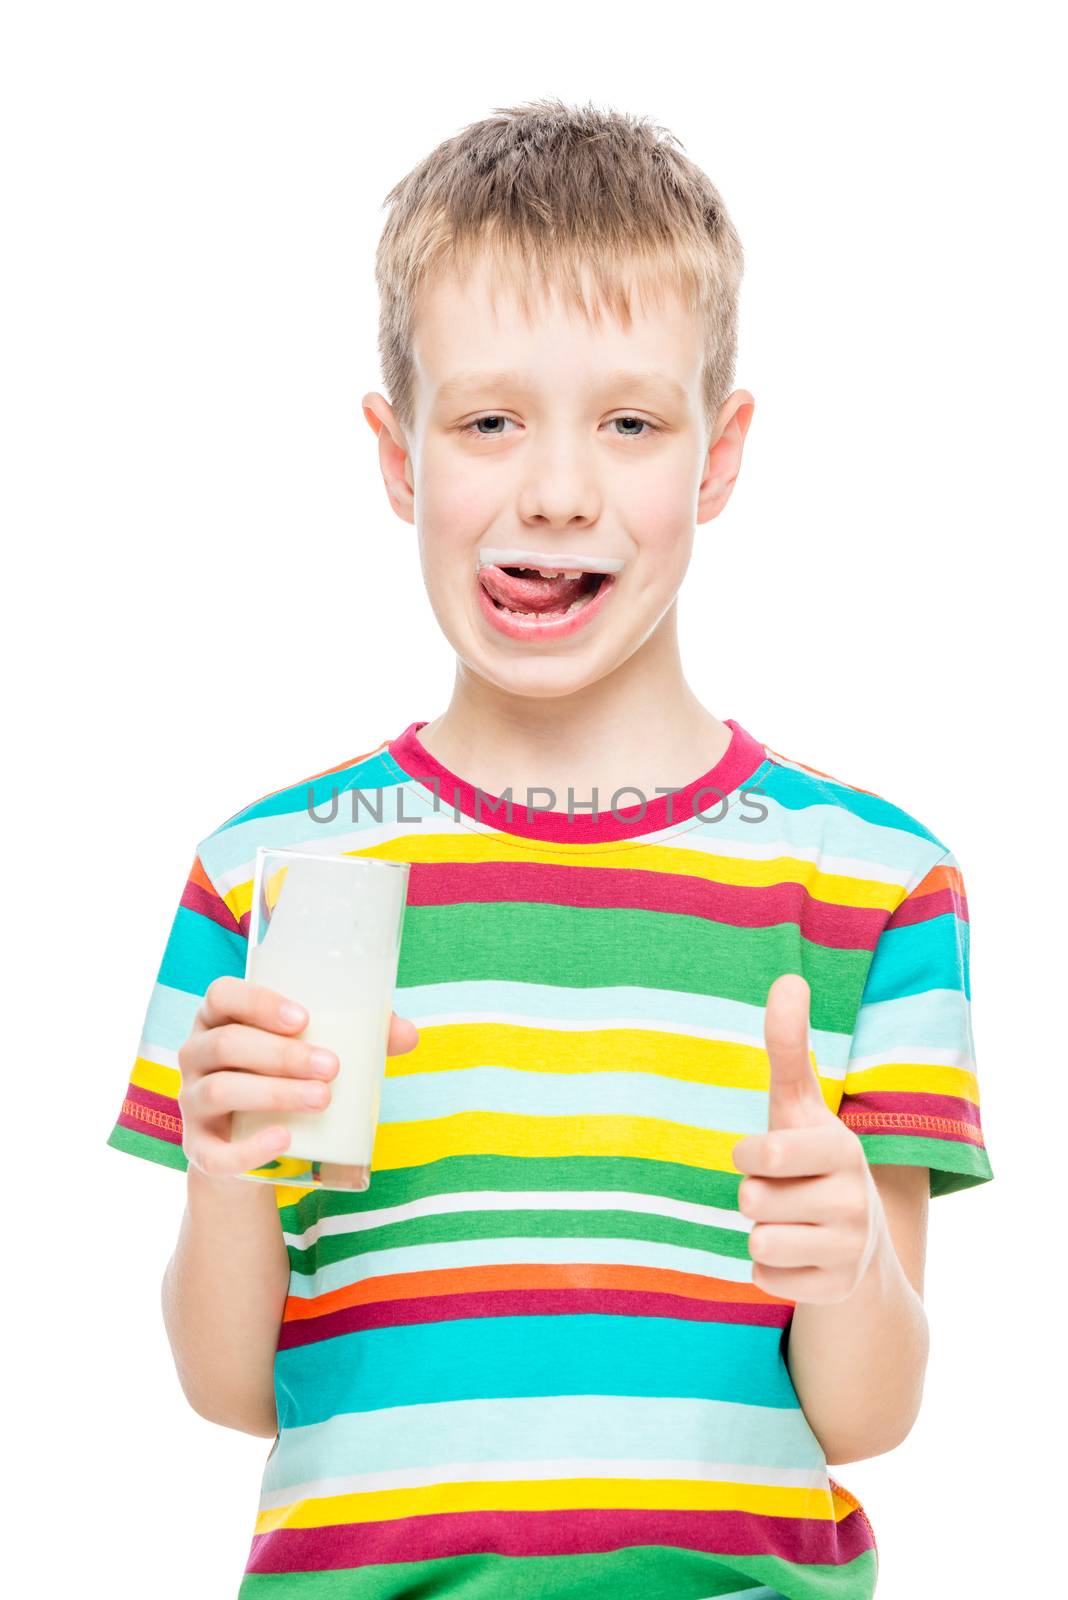 10-year-old boy and healthy tasty milk drink, portrait isolated by kosmsos111